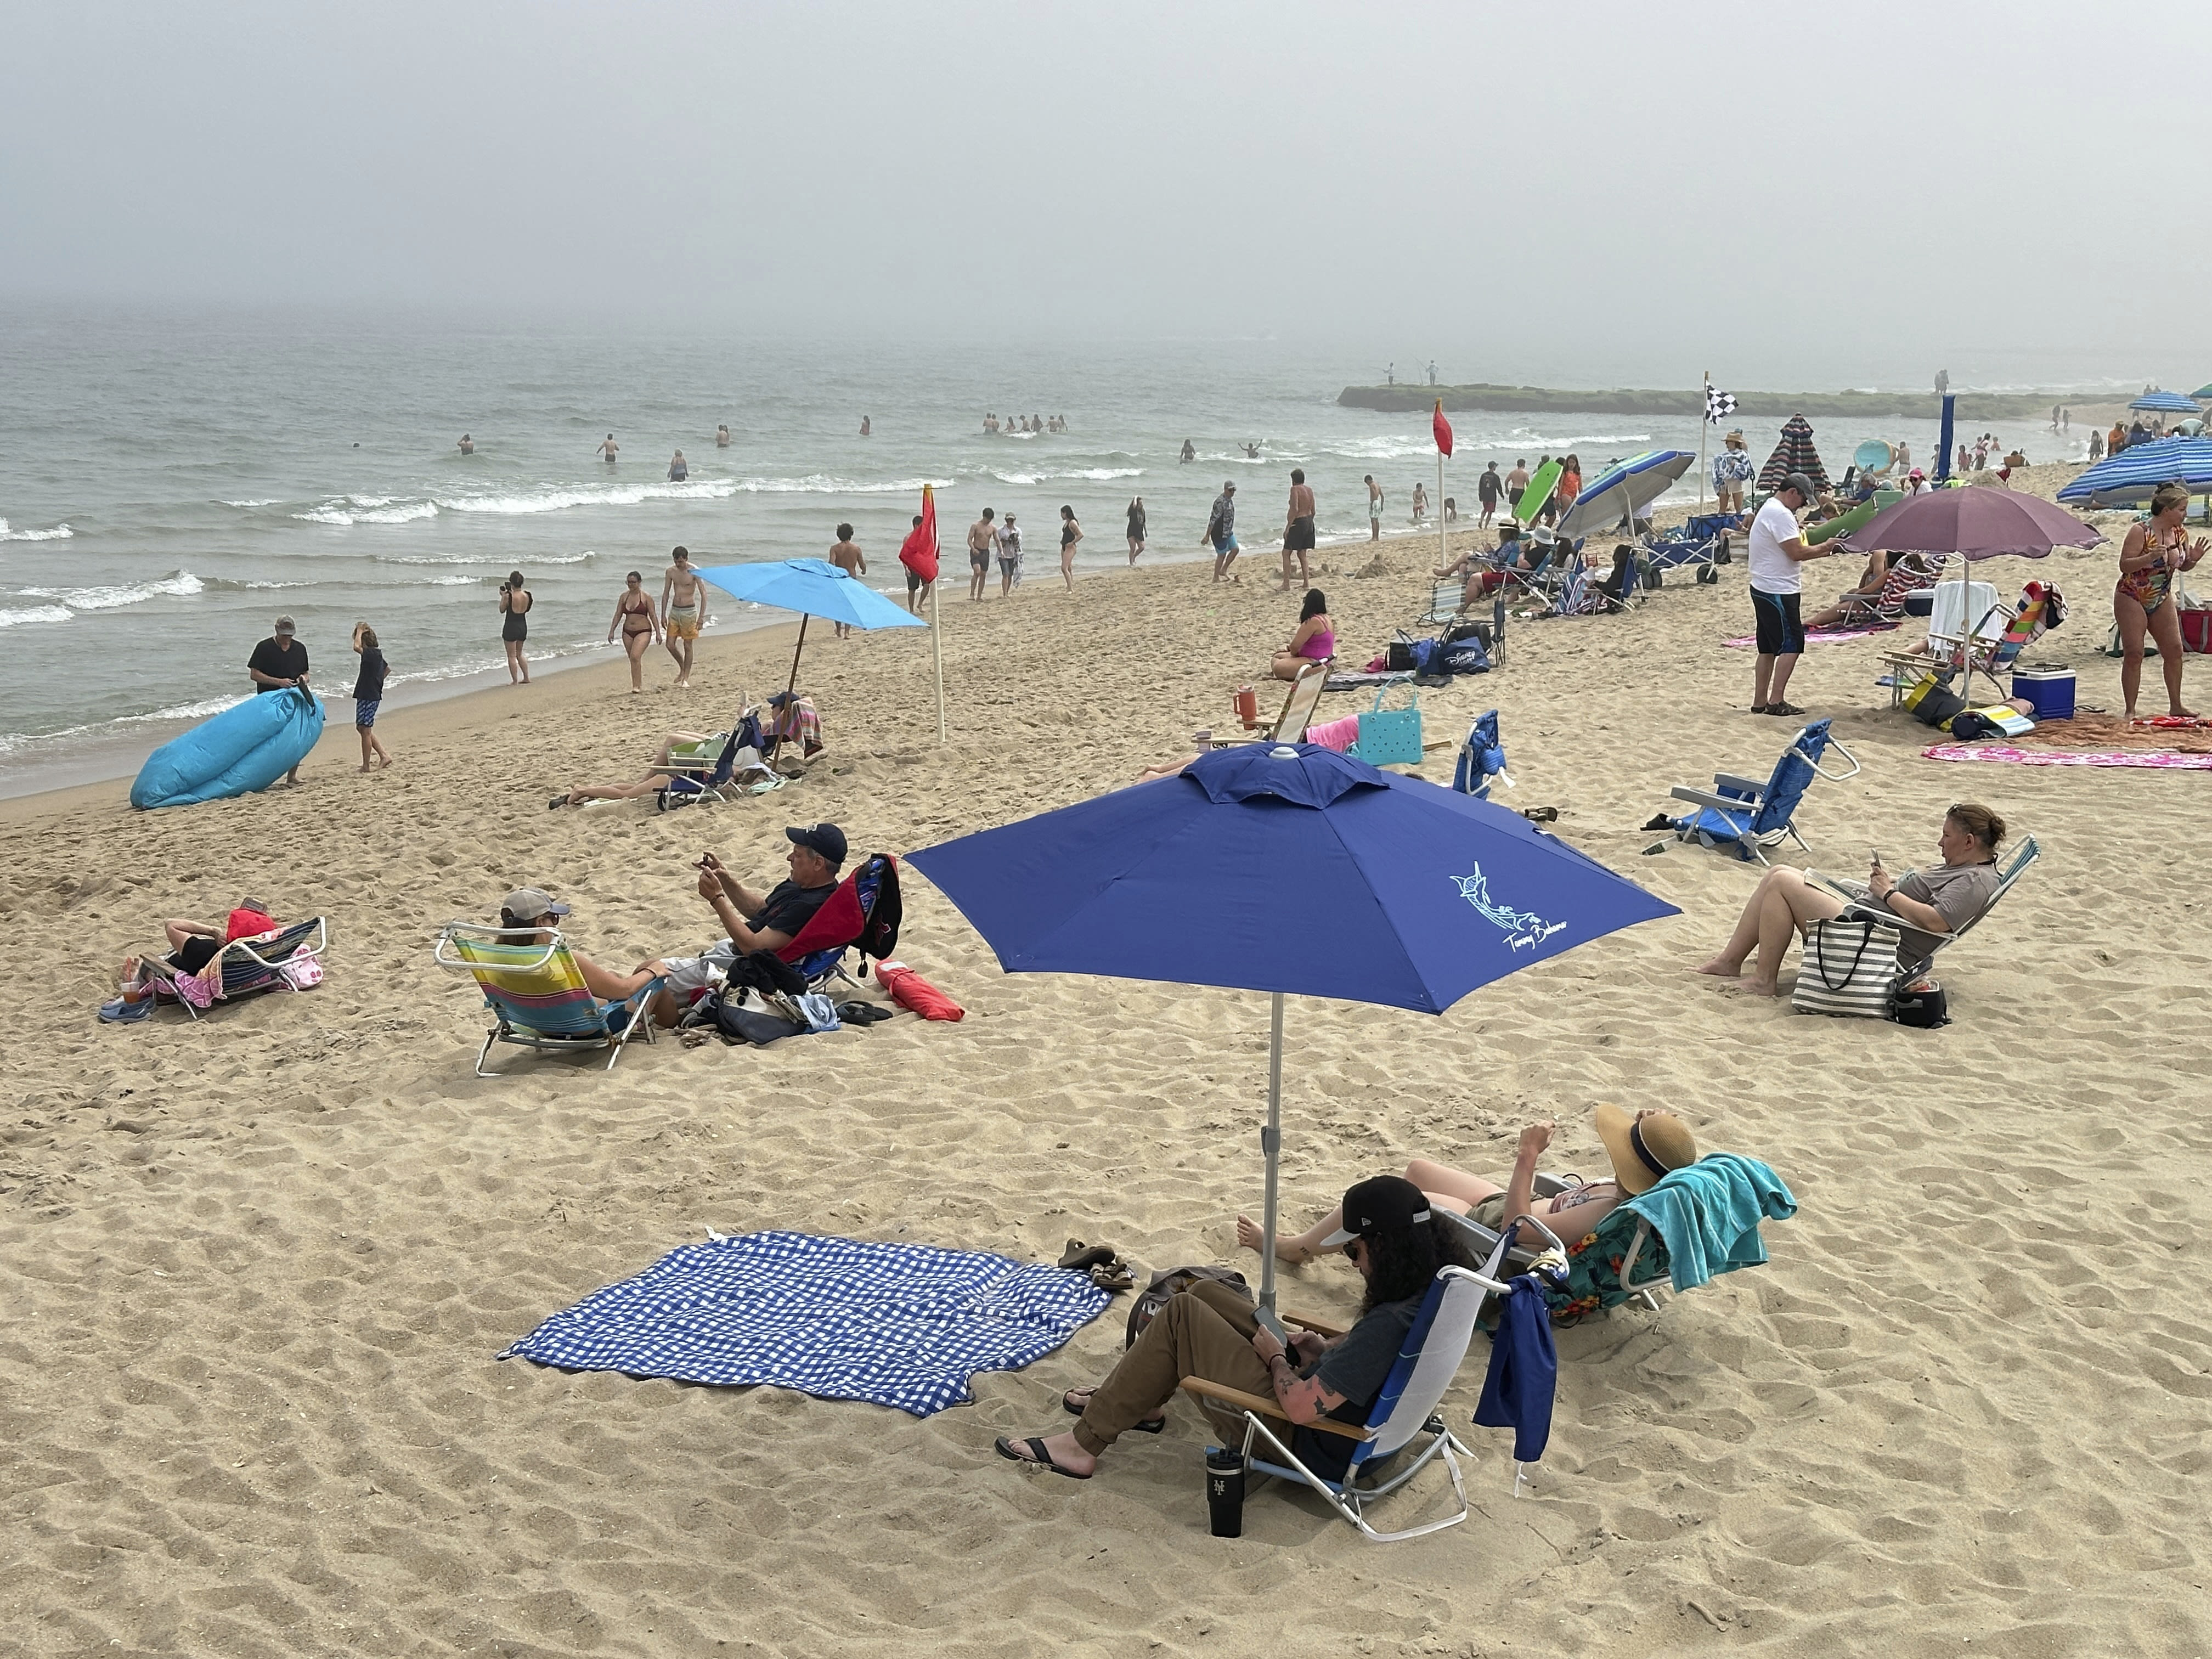 Christian group temporarily opens beaches it has closed on Sunday mornings as court fight plays out